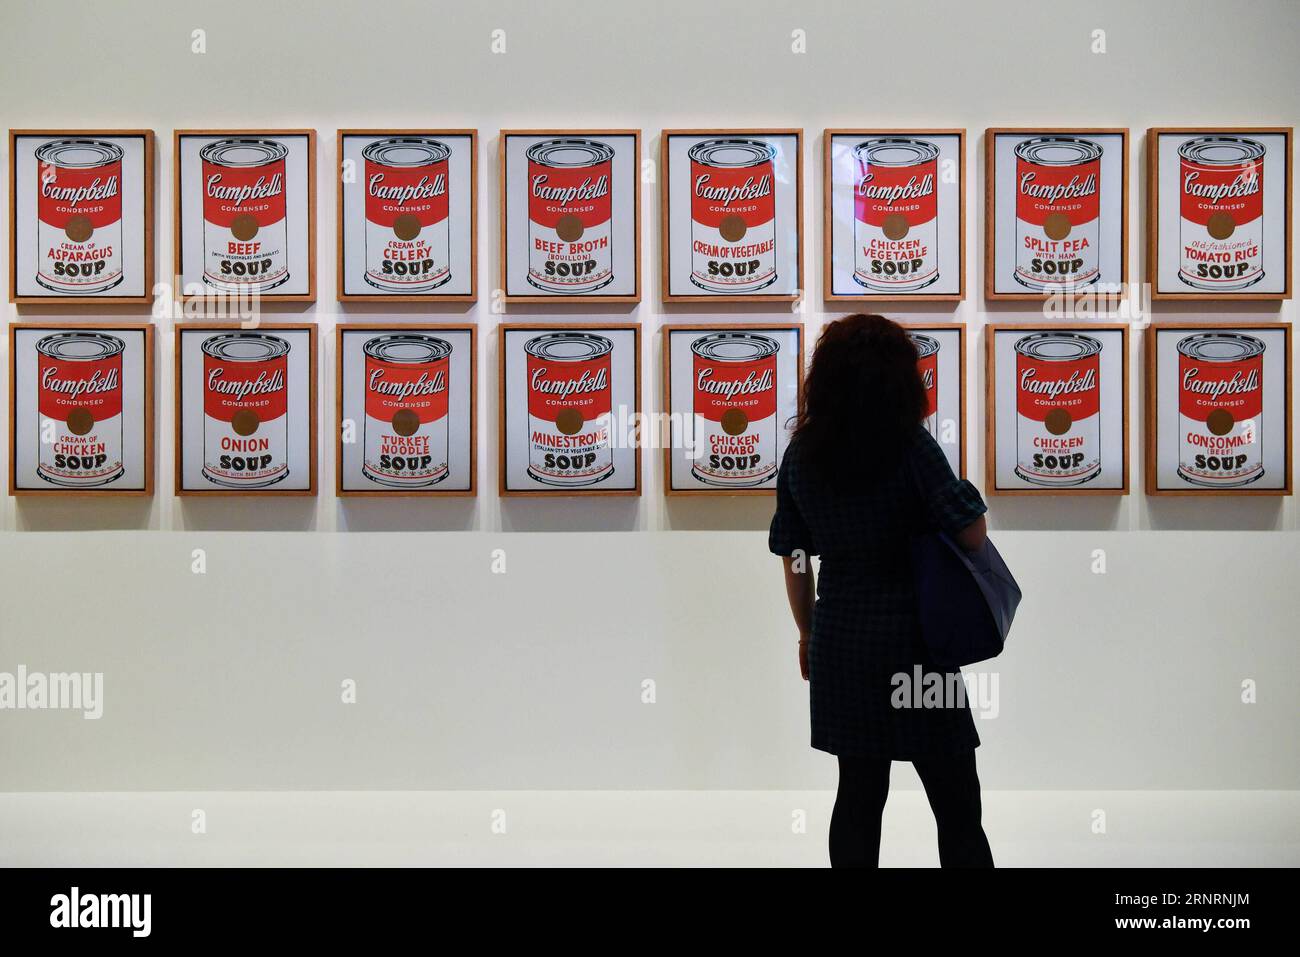 (171010) -- PARIS, Oct. 10, 2017 -- A visitor looks at Andy Warhol s Campbell s Soup Cans during a media preview for the exhibition Being Modern: MoMA in Paris at Foundation Louis Vuitton in Paris, France, on Oct. 10, 2017. The Museum of Modern Art (MoMA) and Foundation Louis Vuitton will hold the first comprehensive exhibition in France to present MoMA s collection. The exhibition Being Modern: MoMA in Paris will be on view for the public at Foundation Louis Vuitton from Oct. 11, 2017 to March 5, 2018. ) FRANCE-PARIS-EXHIBITION-MOMA ChenxYichen PUBLICATIONxNOTxINxCHN Stock Photo